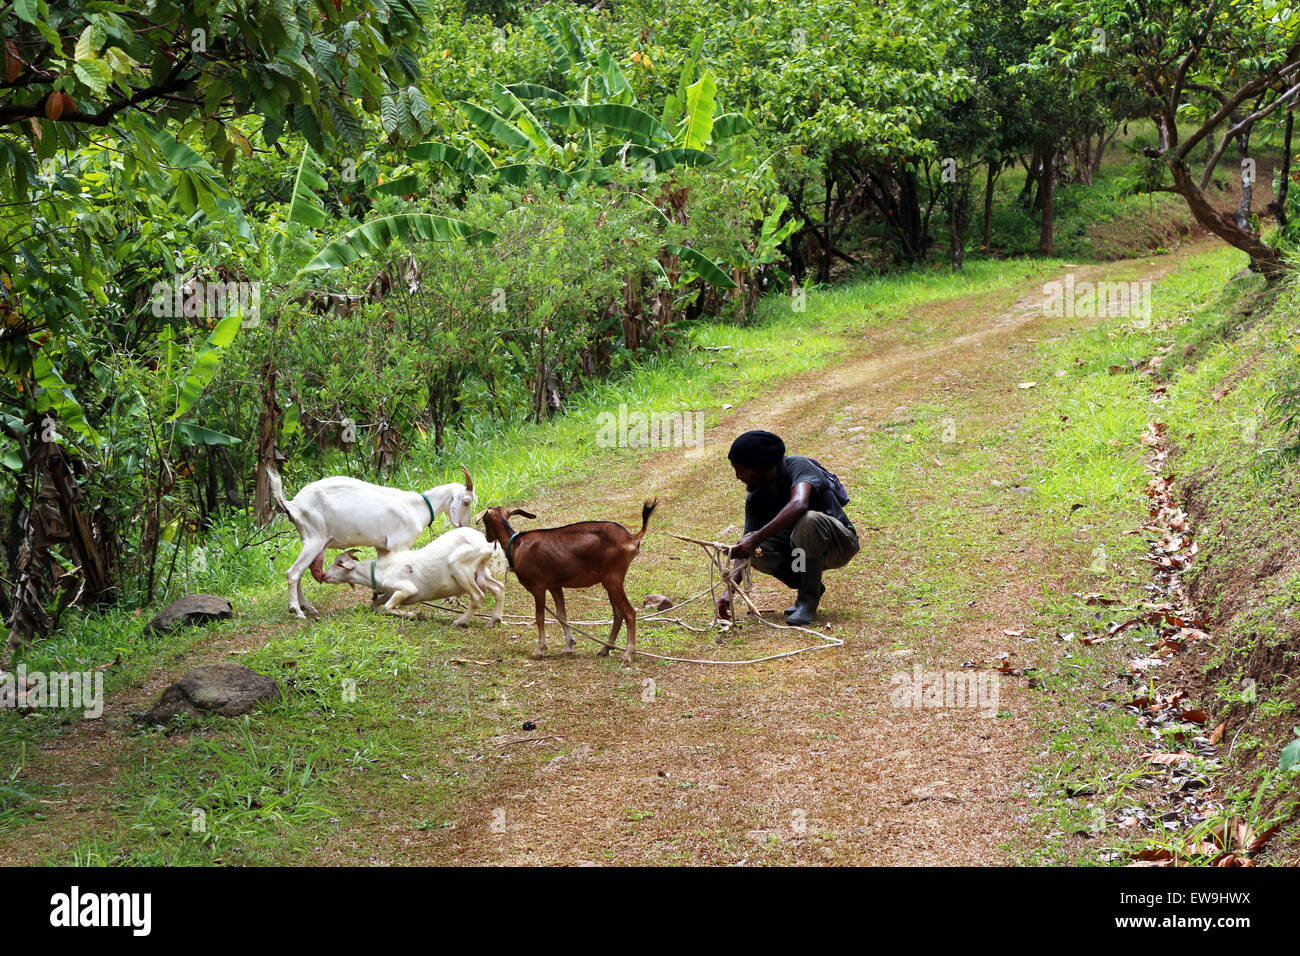 Man tending to a goat in Grenada Stock Photo